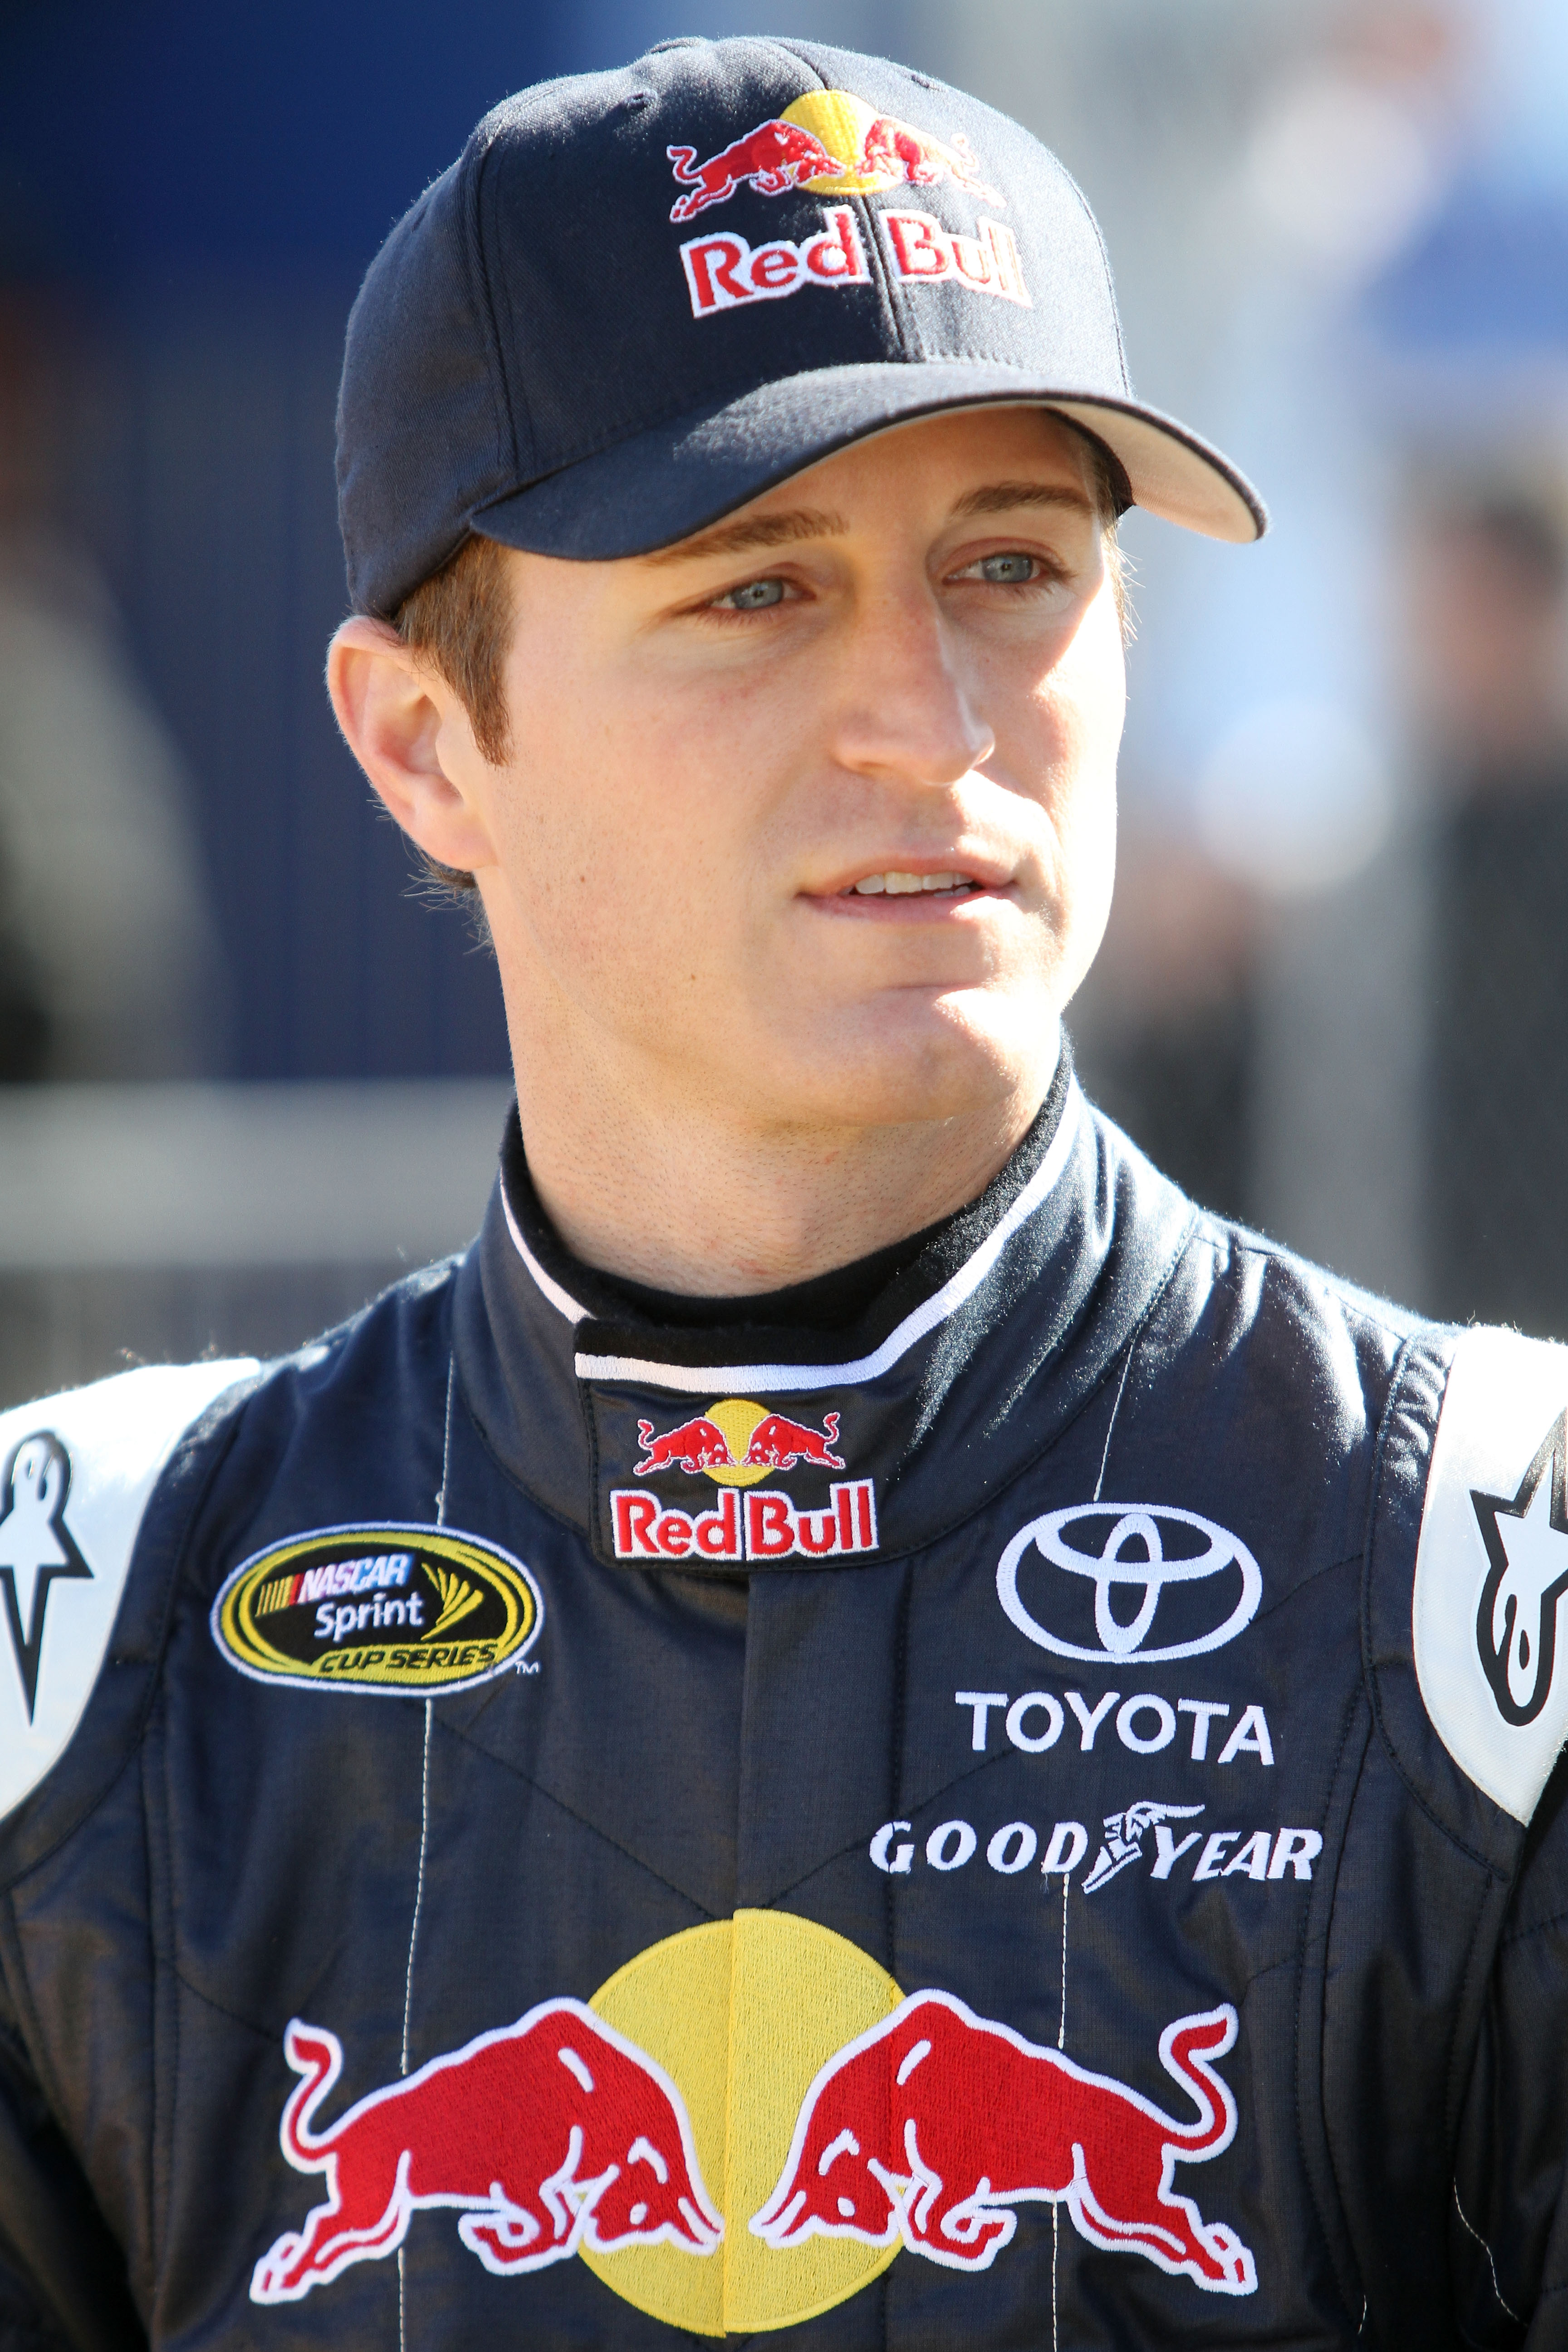 DAYTONA BEACH, FL - FEBRUARY 12:  Kasey Kahne, driver of the #4 Red Bull Toyota, stands in the garage area during practice for the NASCAR Sprint Cup Series Daytona 500 at Daytona International Speedway on February 12, 2011 in Daytona Beach, Florida.  (Pho